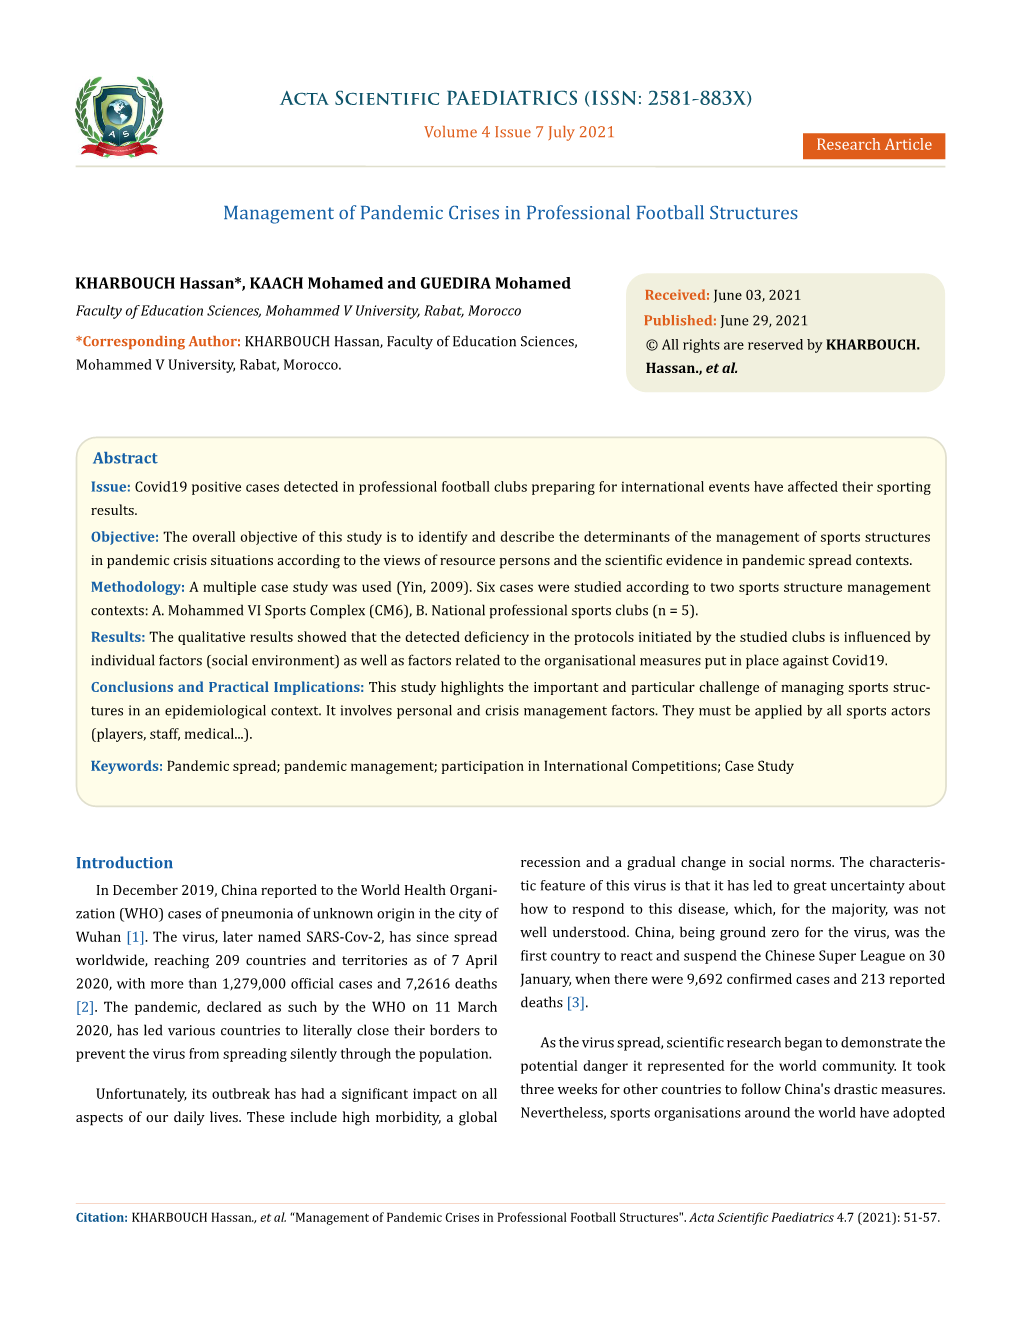 Management of Pandemic Crises in Professional Football Structures